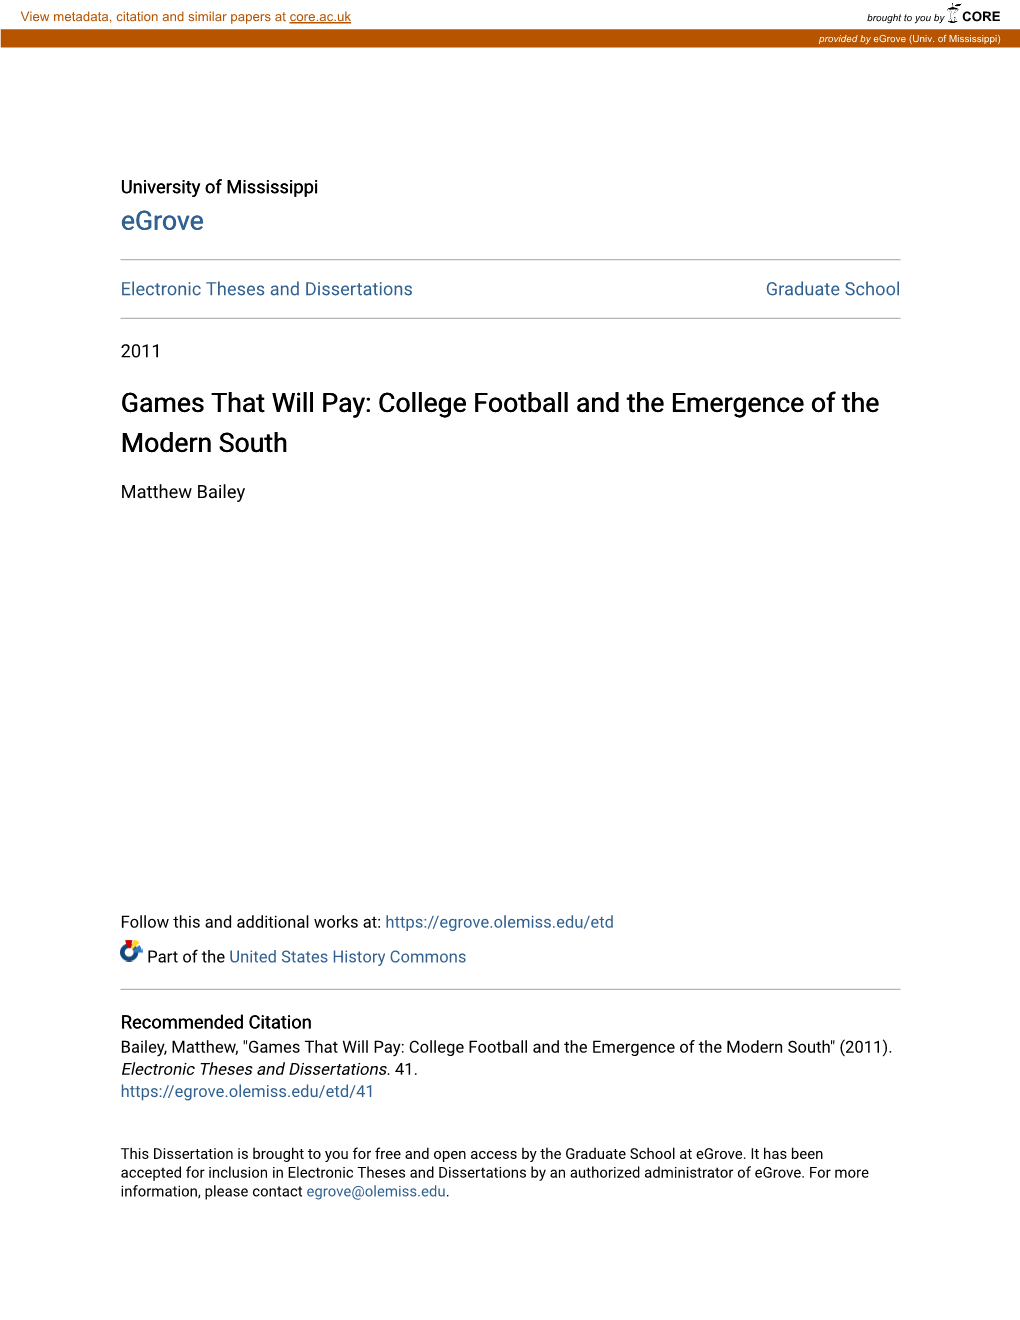 College Football and the Emergence of the Modern South